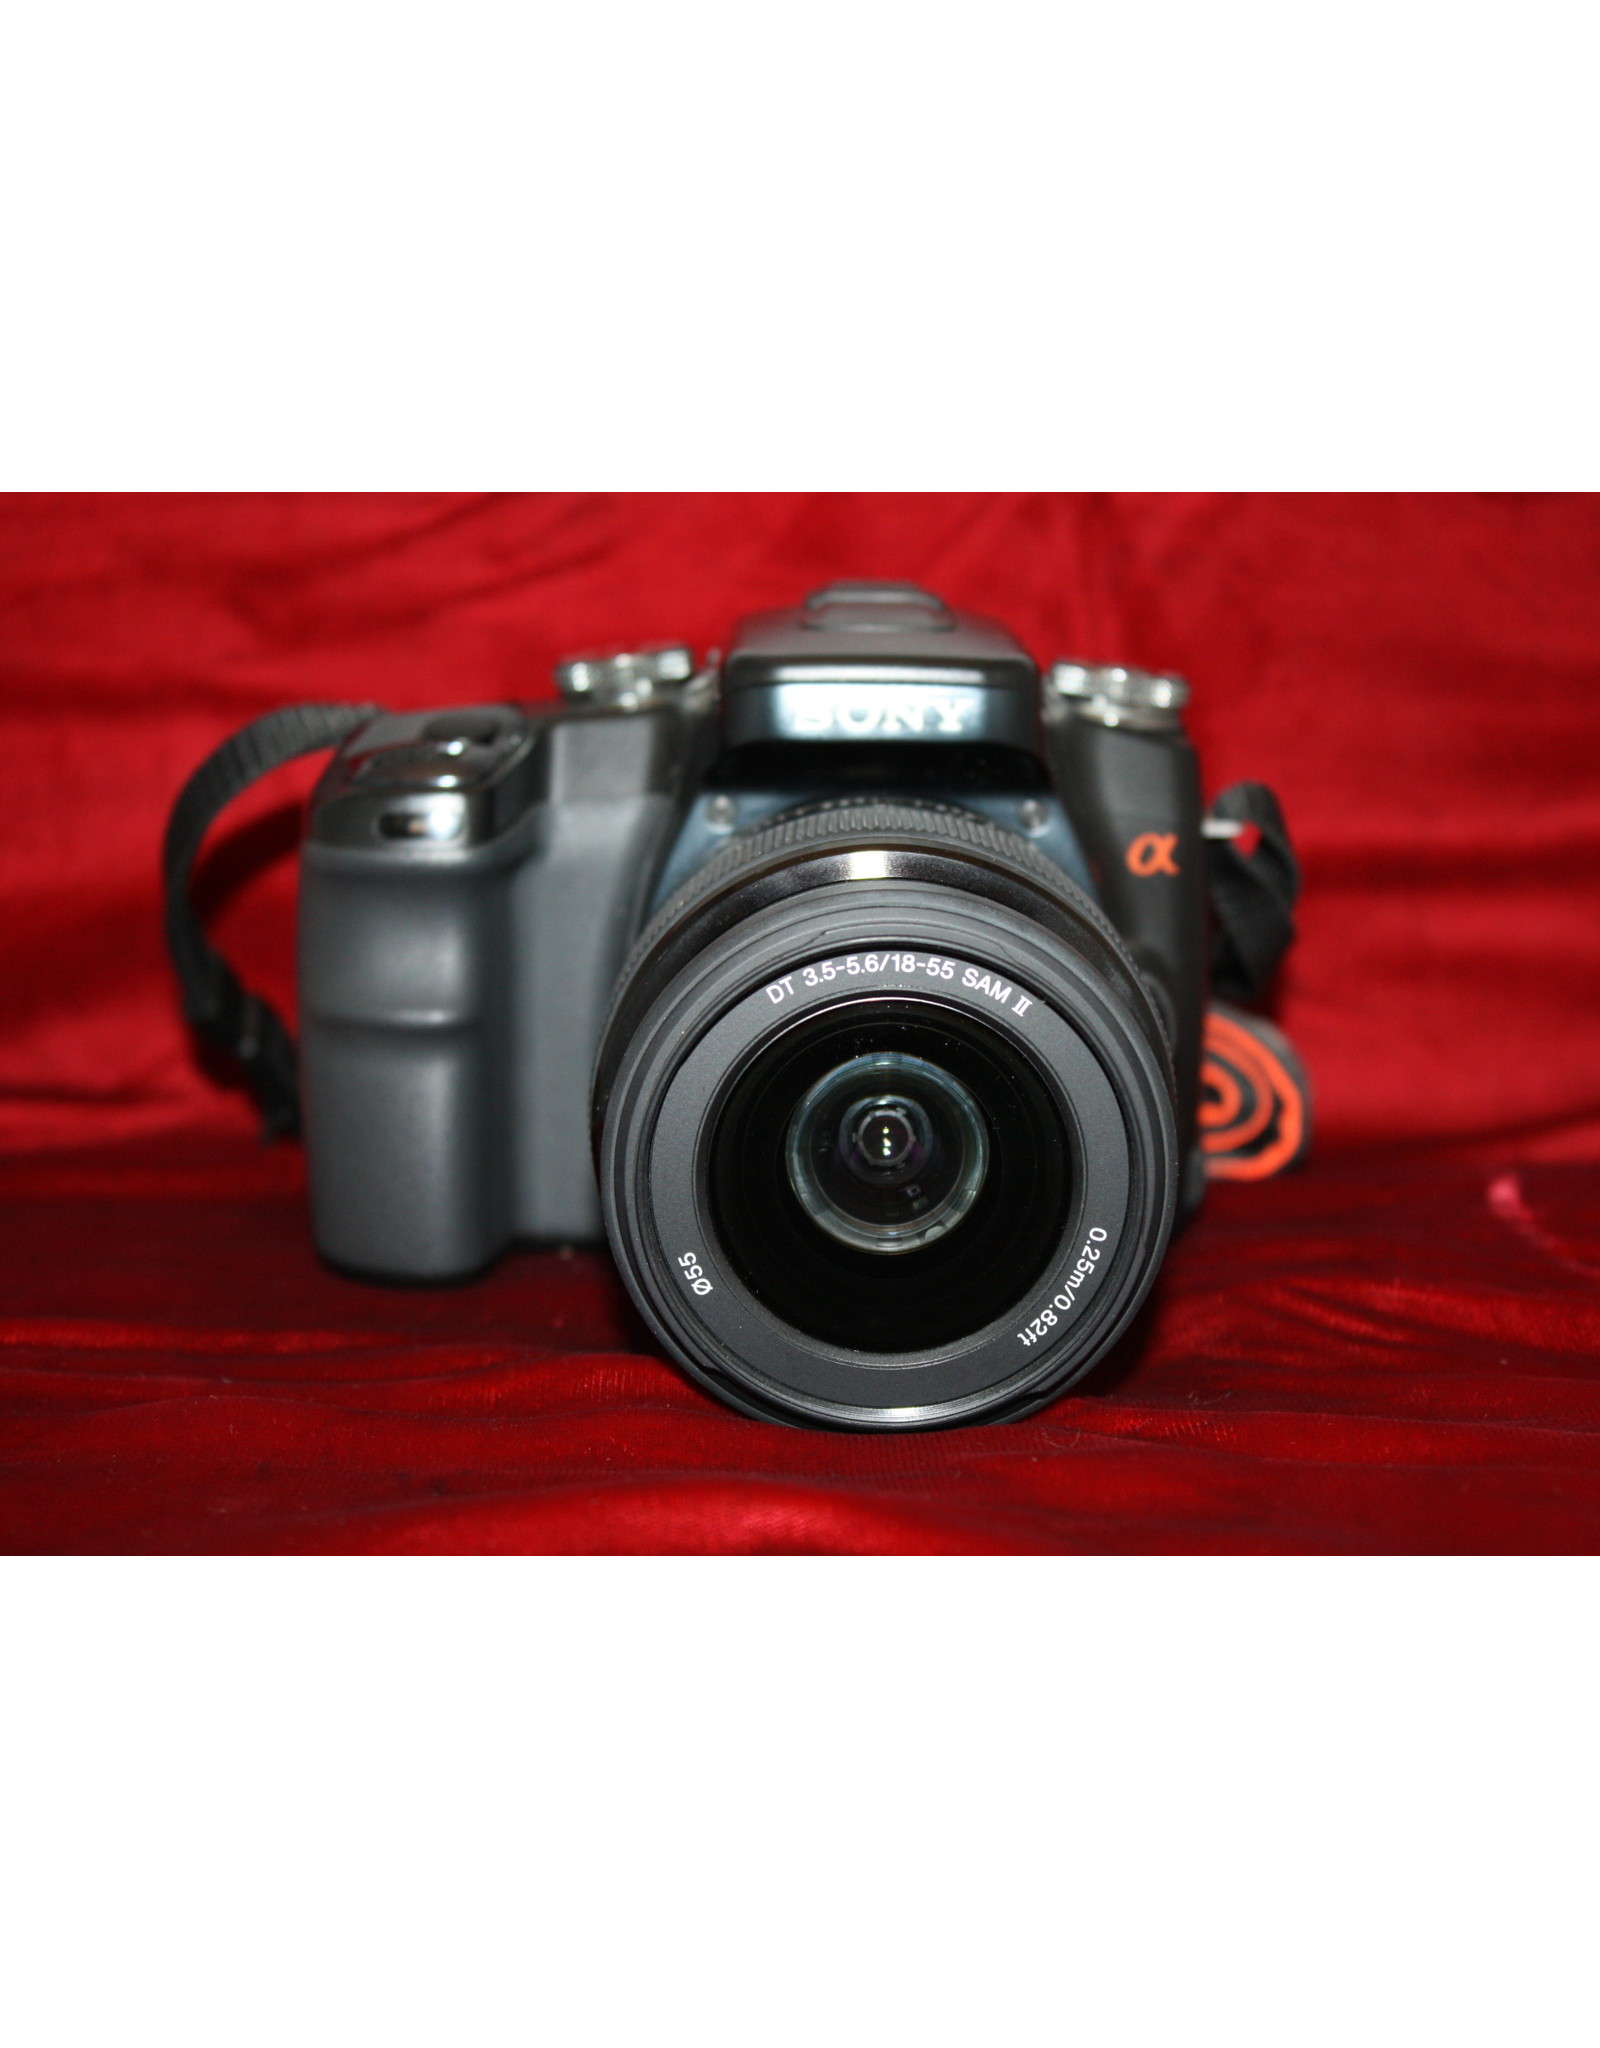 Sony Alpha A100 10.2MP Digital SLR Camera Black Body, with Sony 18-55mm lens & Charger(Pre-owned)